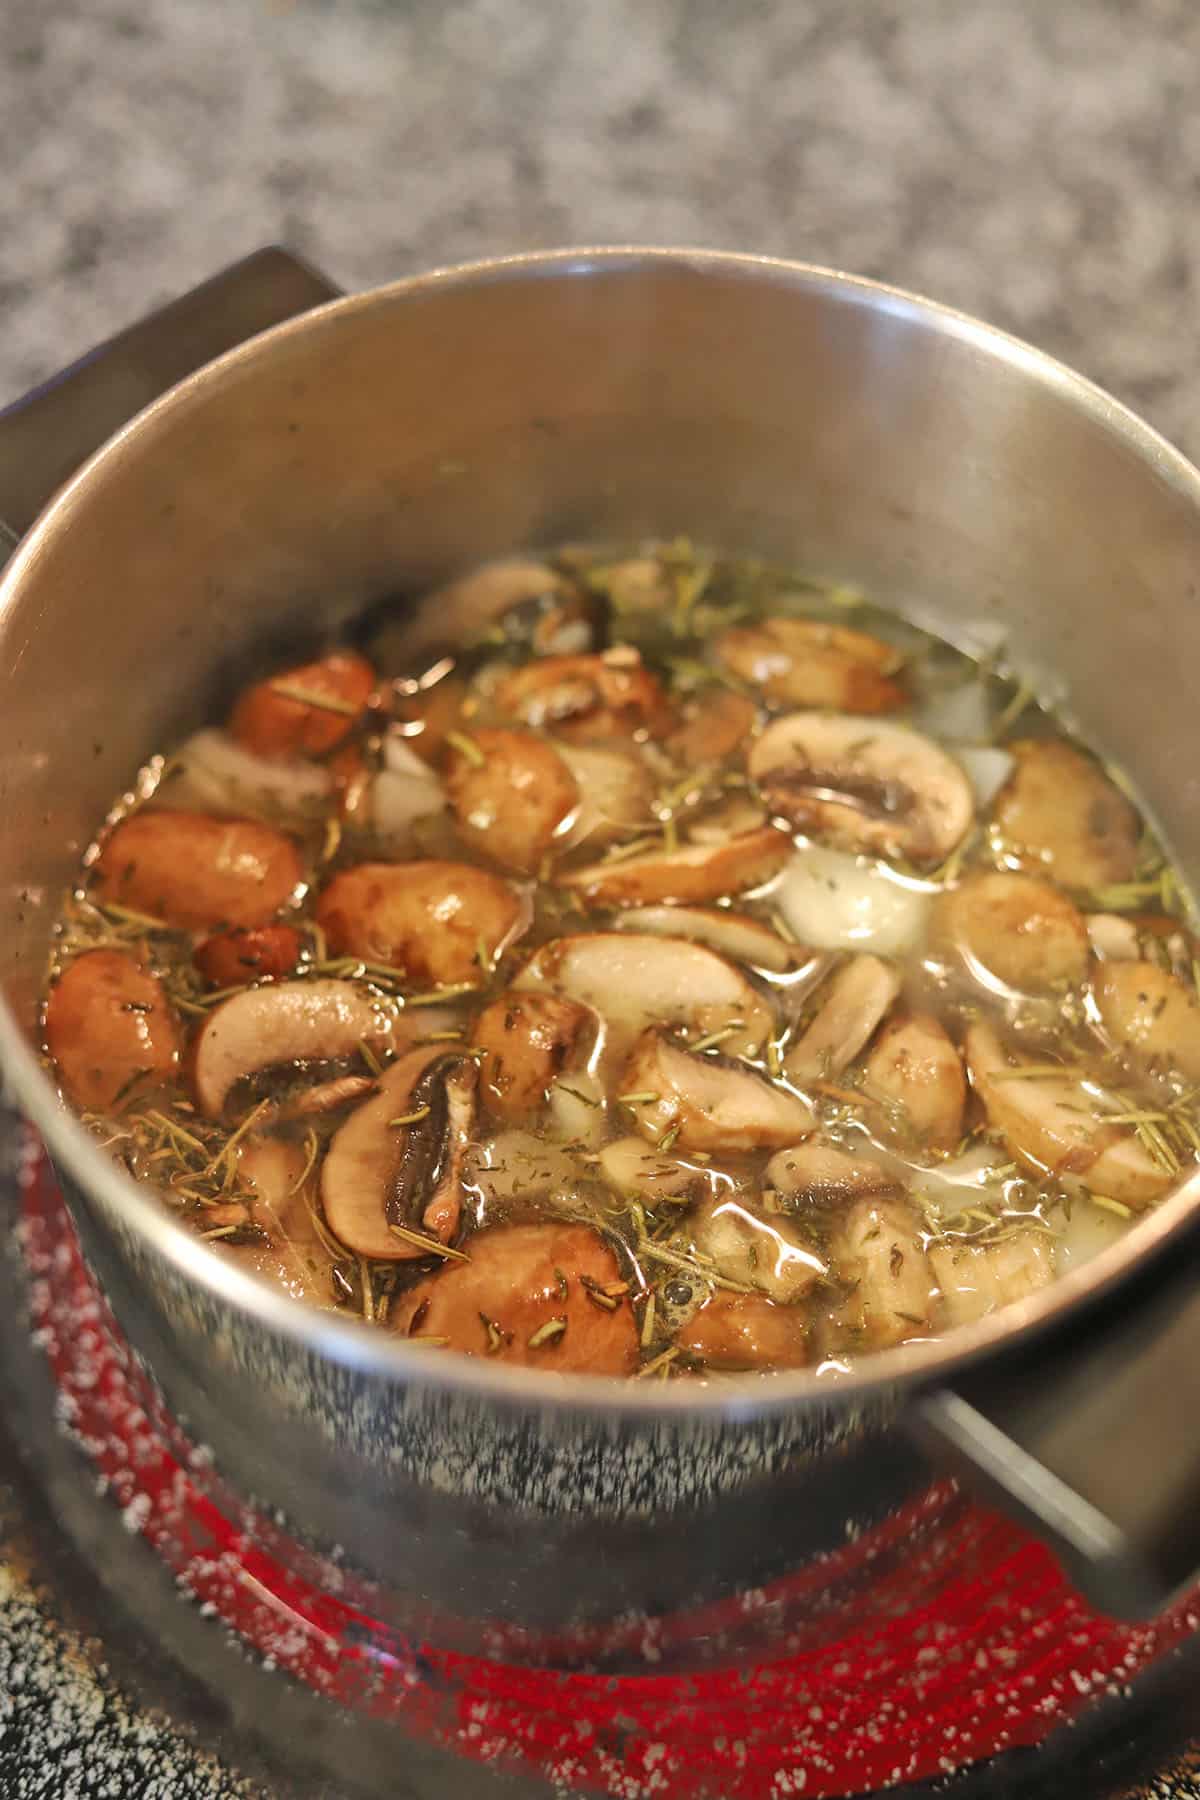 Mushrooms with herbs in soup pot.